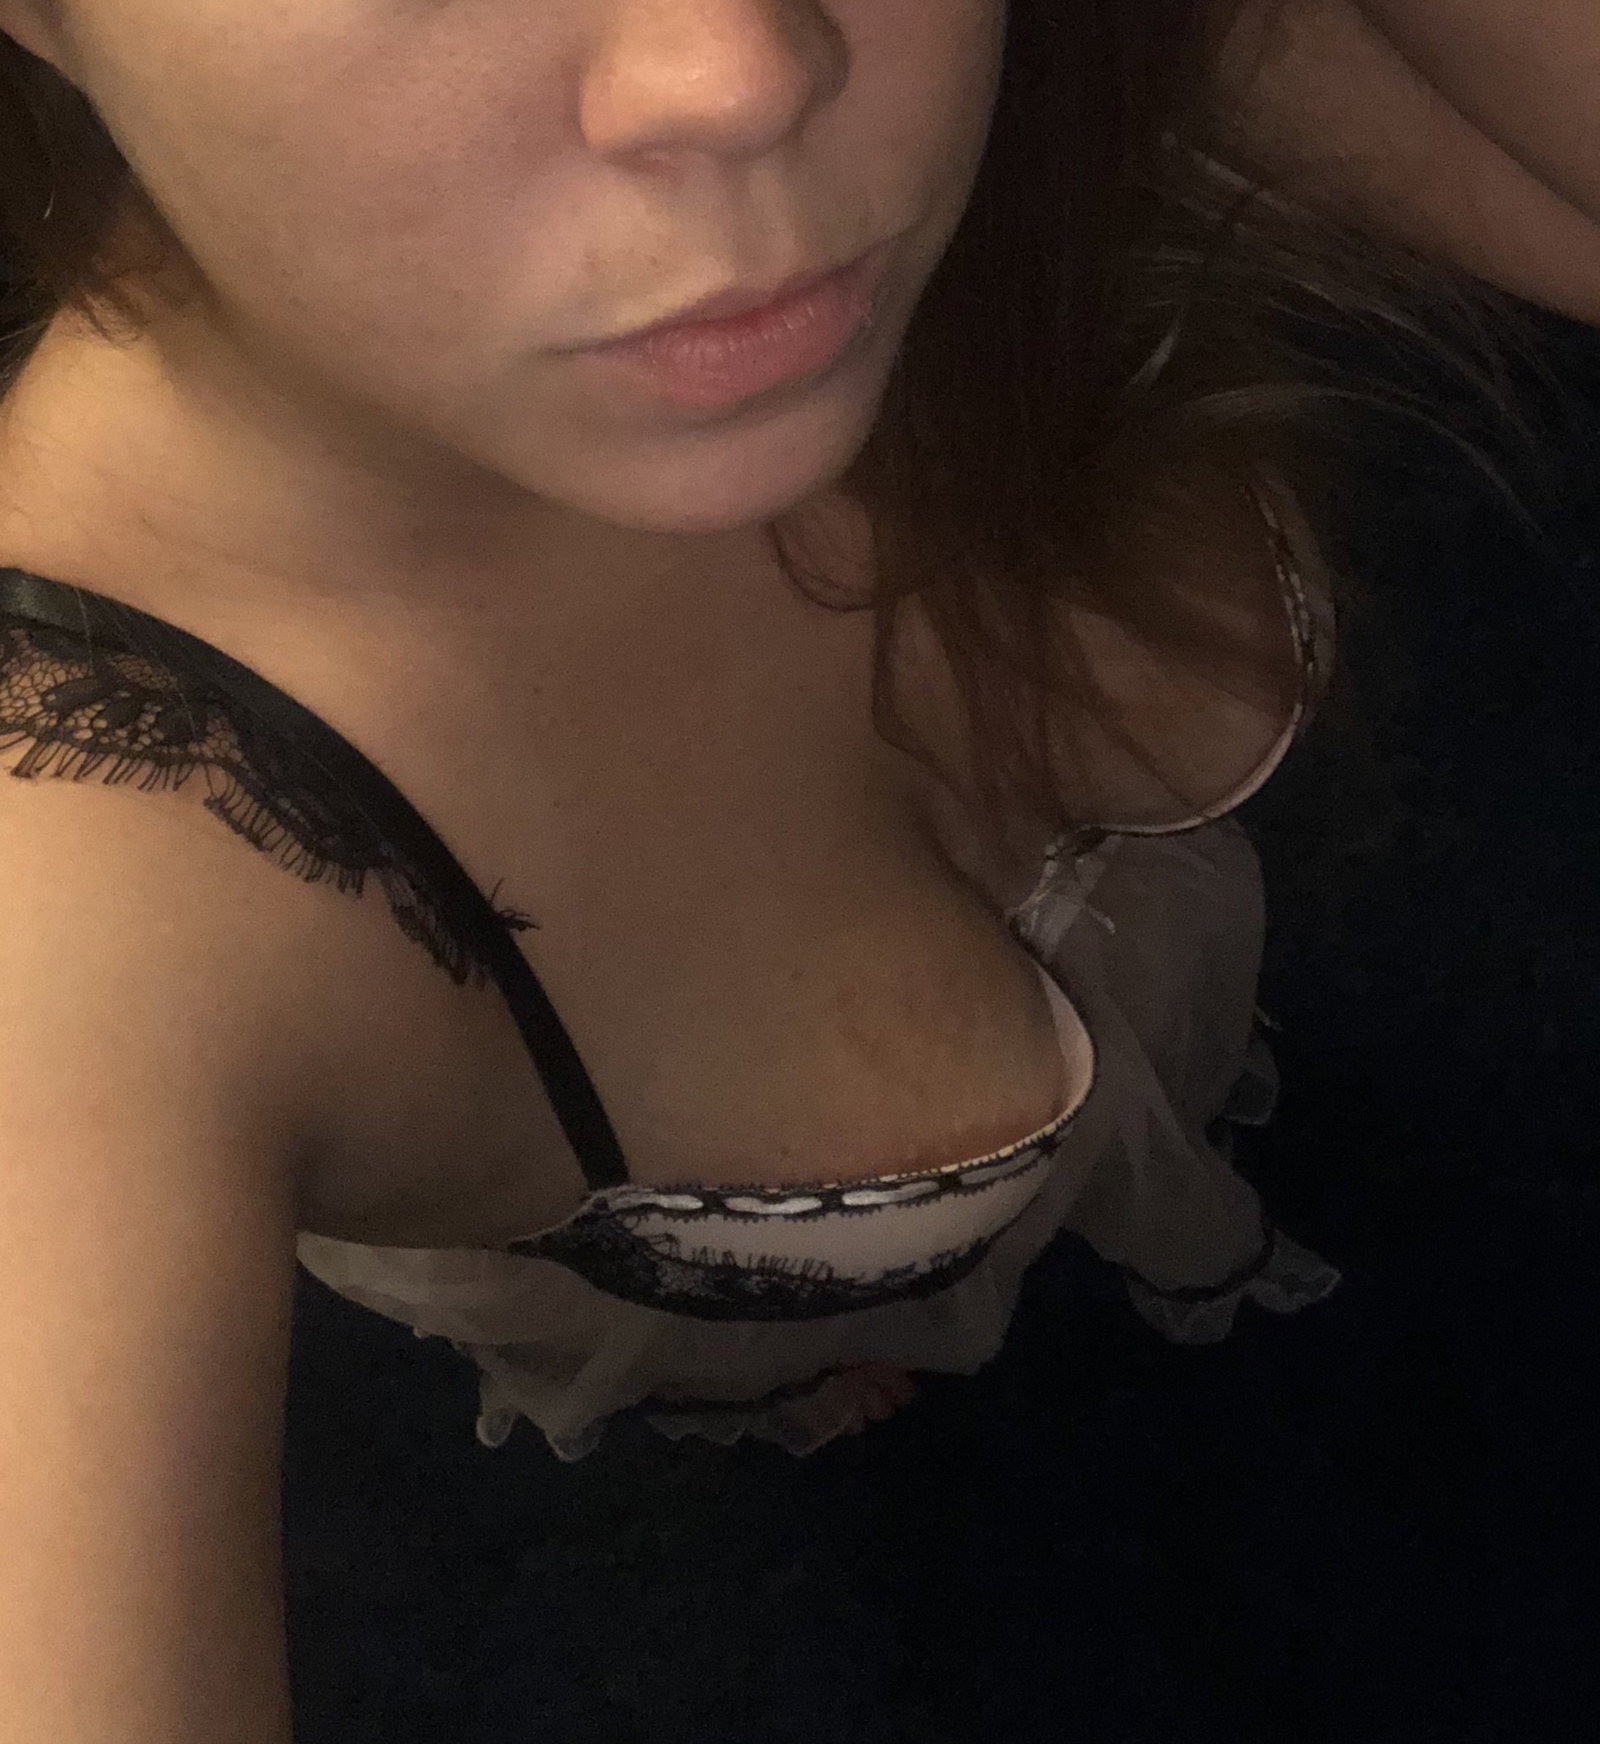 Photo by Shifty1588 with the username @Shifty1588,  November 6, 2019 at 10:42 PM. The post is about the topic MILF and the text says 'she is loving all the comments and likes tell us what yall want to see, and what you would do with her and keep her turned on!!'